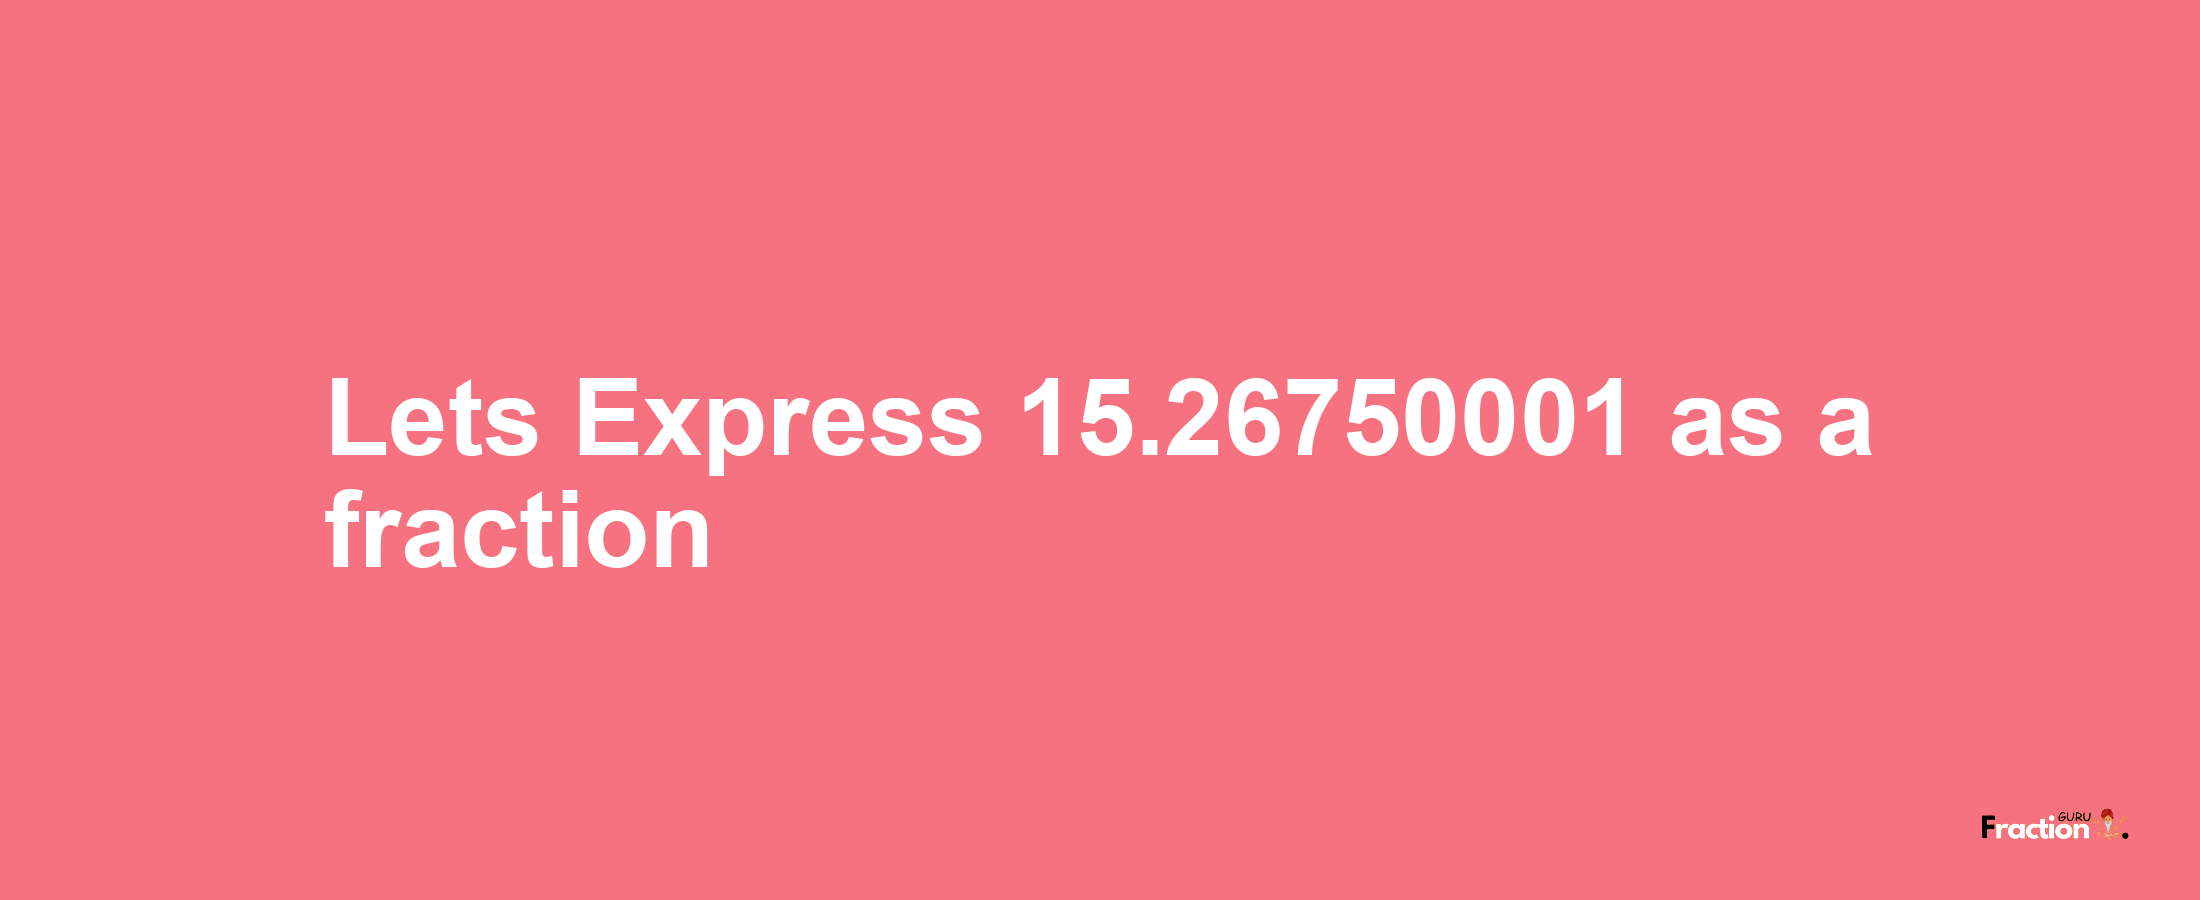 Lets Express 15.26750001 as afraction